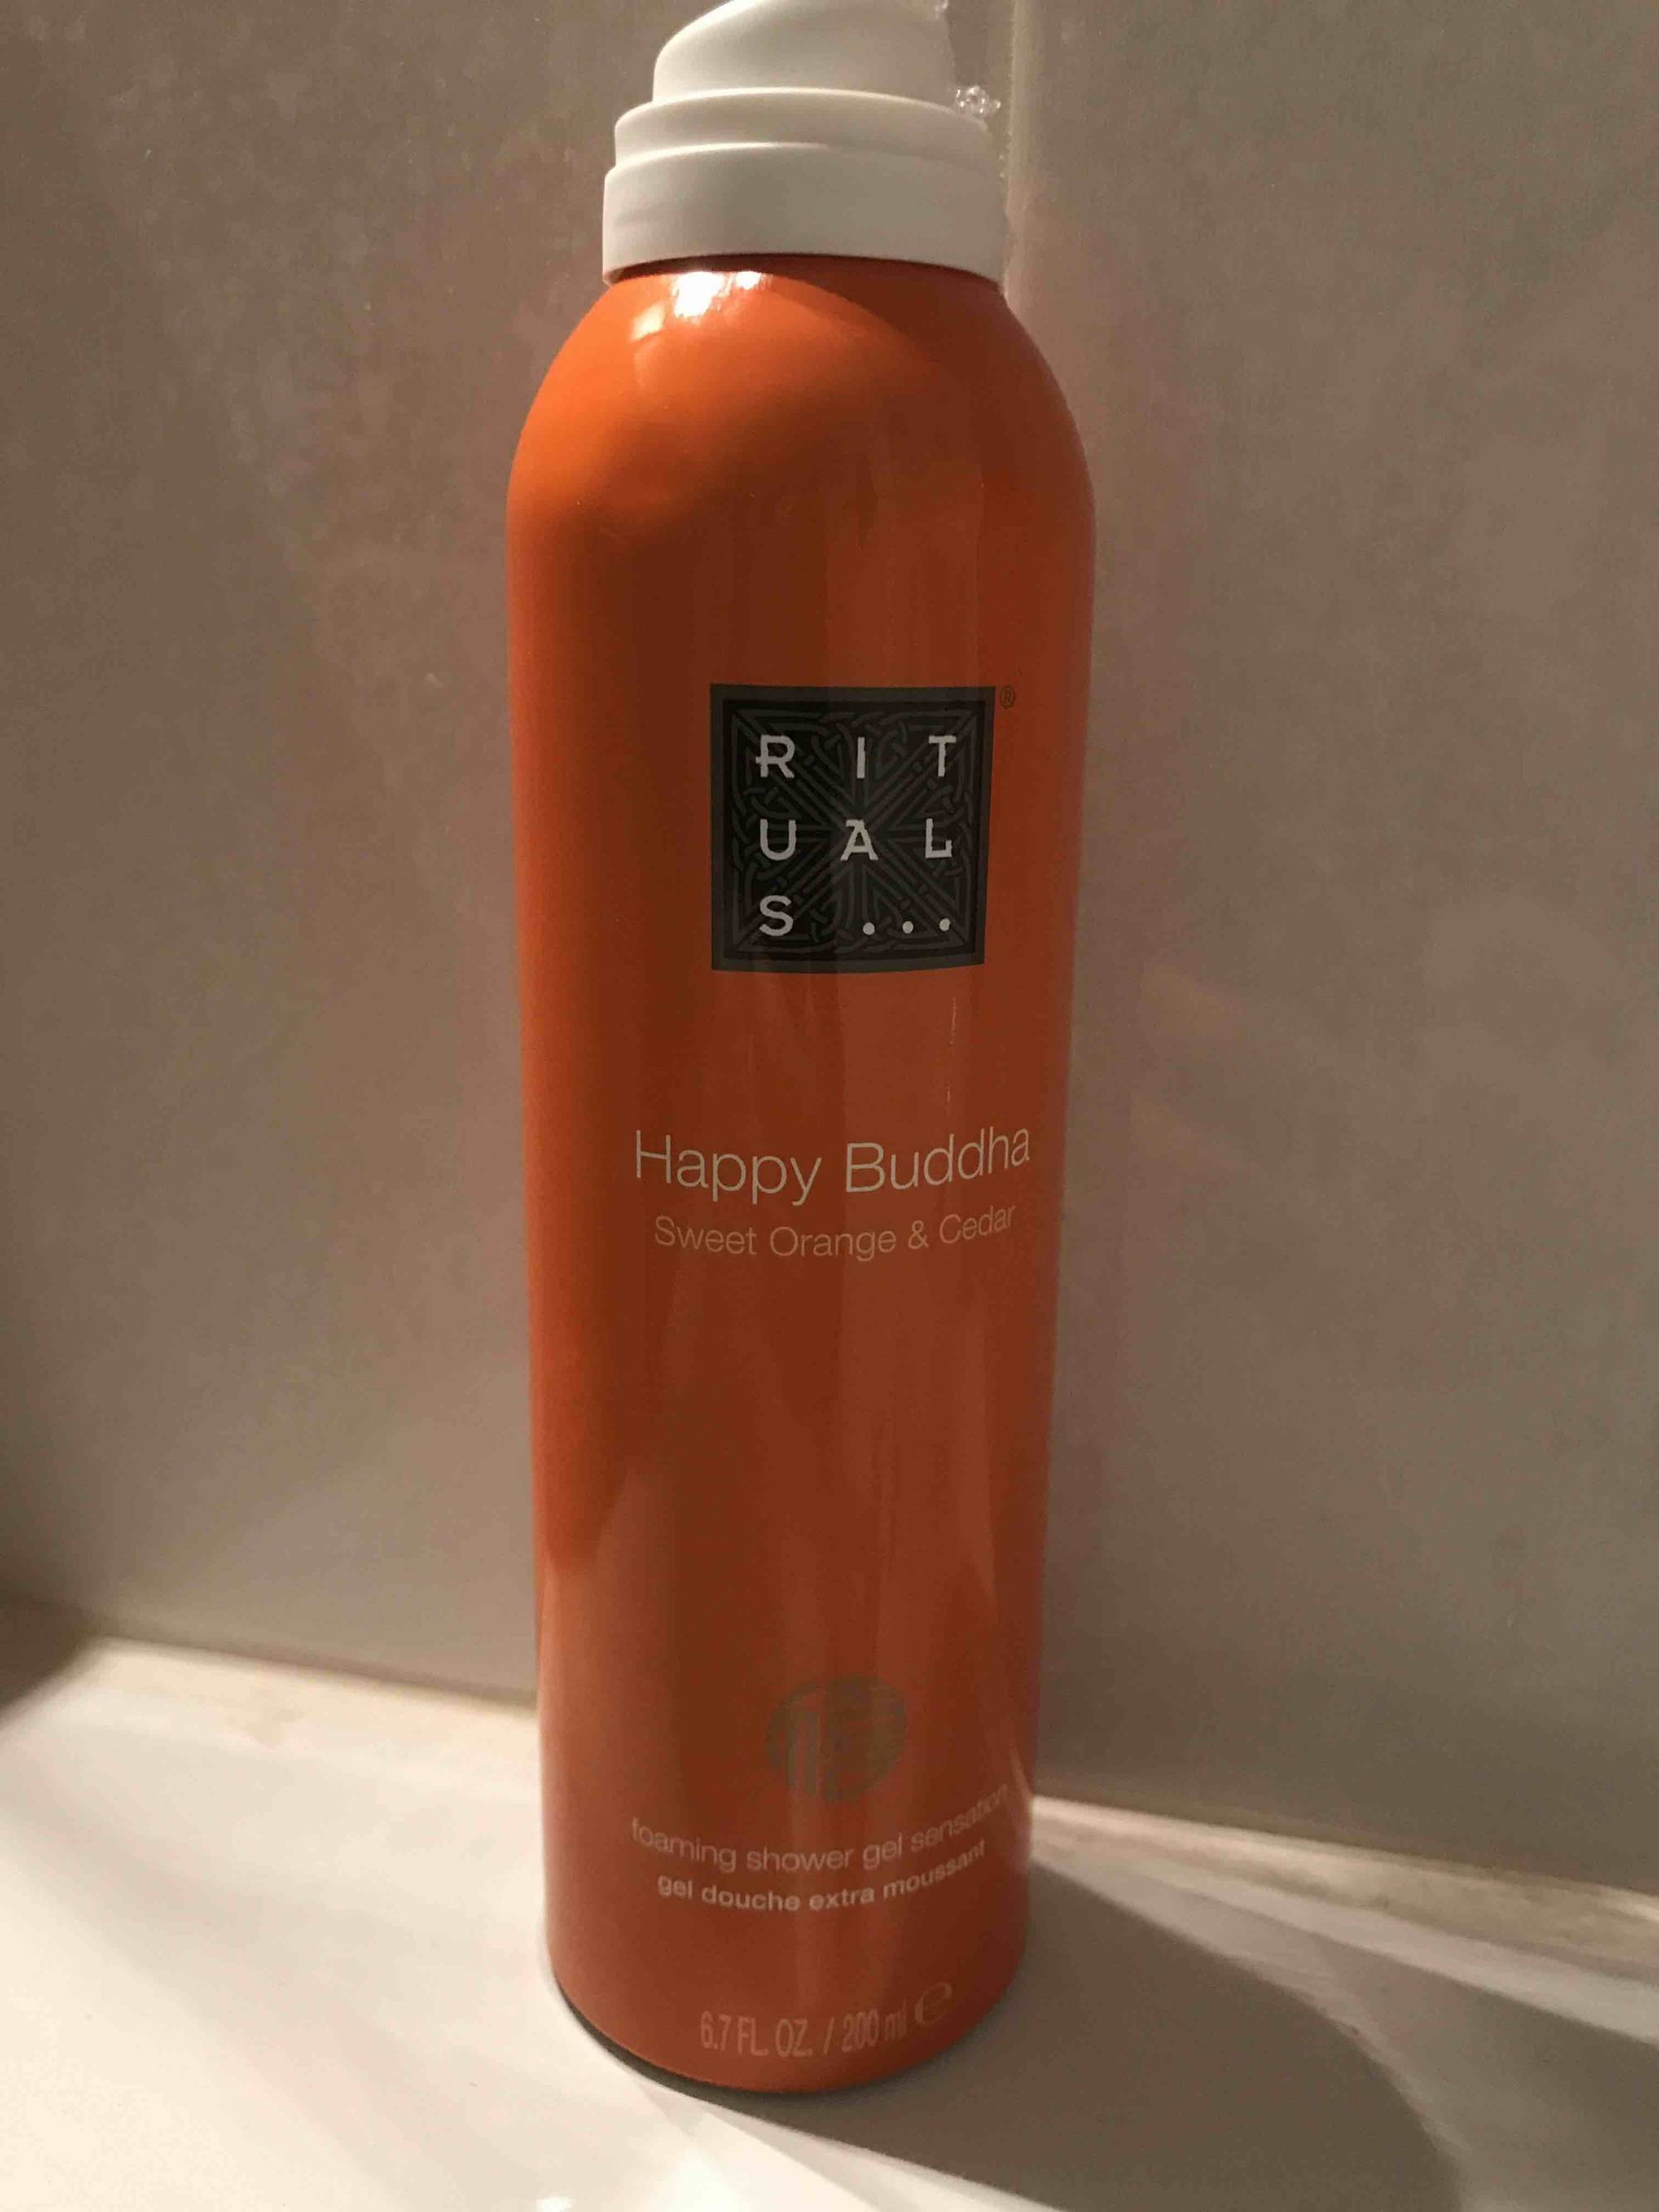 RITUALS - Happy Buddha - Gel douche extra moussant